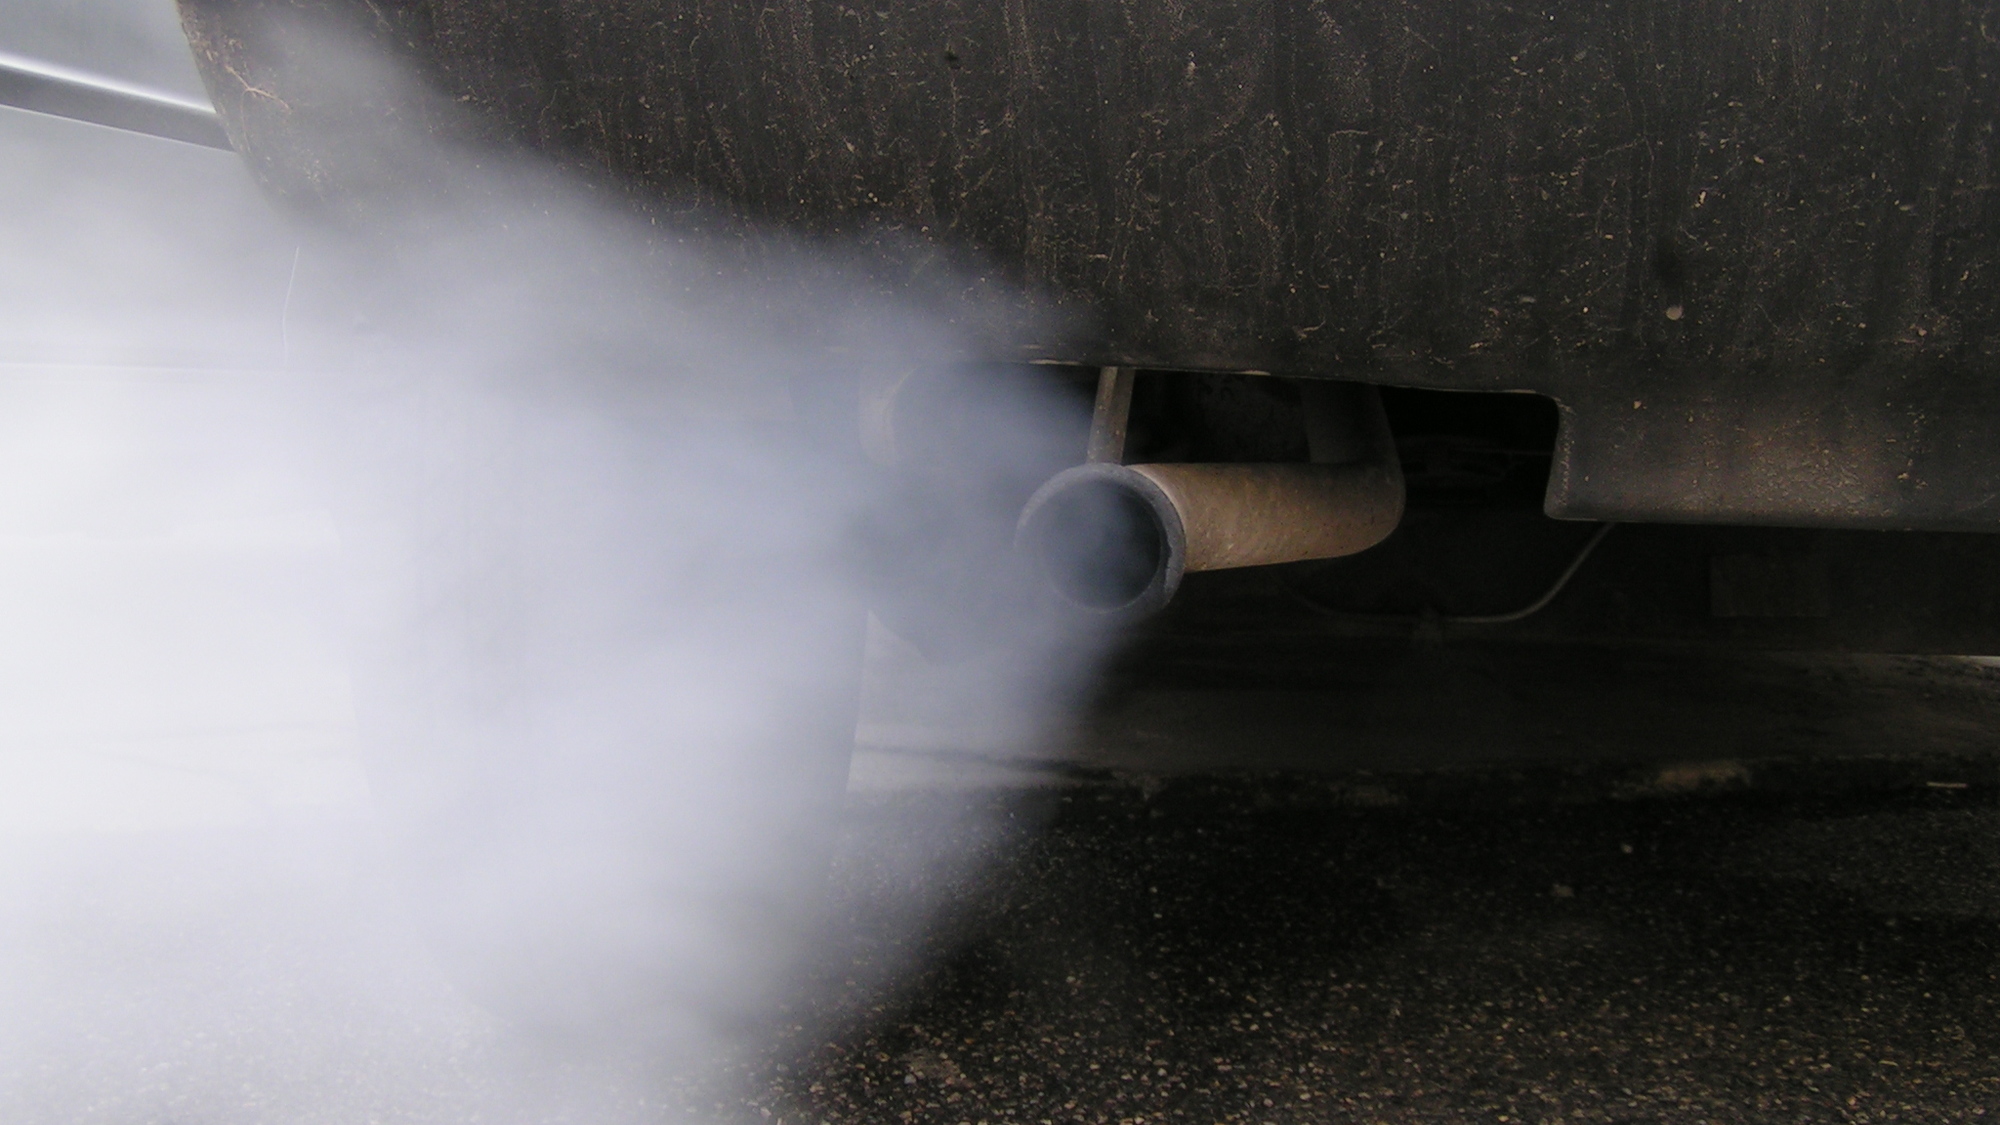 Exhaust emissions from tailpipe [photo: Simone Ramella, 2005, used under Creative Commons 2.0]